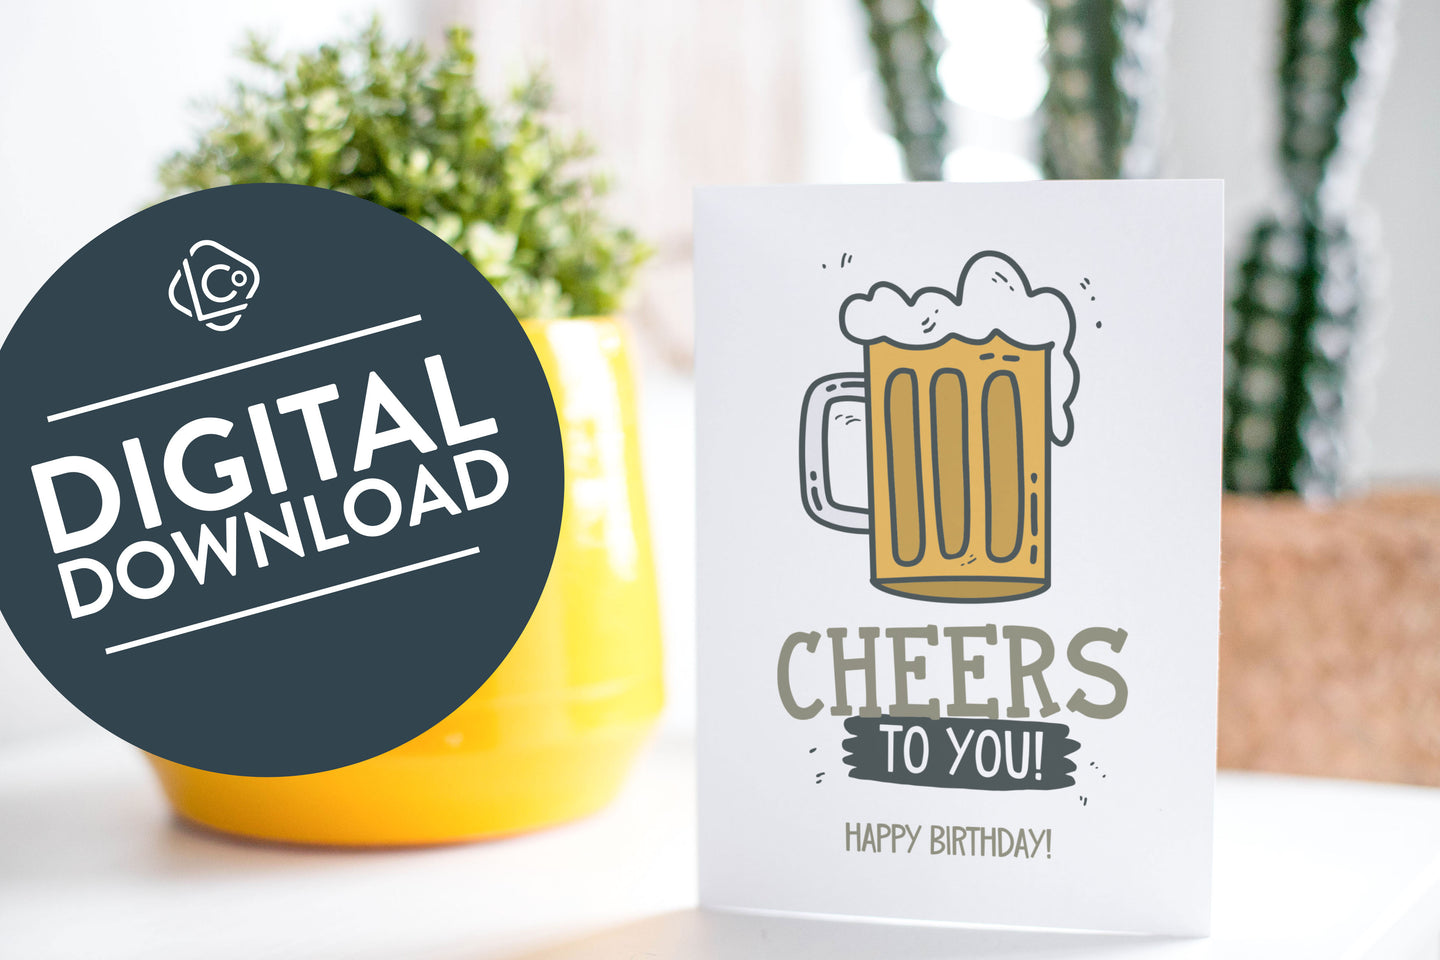 A greeting card is on a table top with a yellow plant pot and a green plant inside. The card features the words “Cheers to You! Happy Birthday!” with an illustrated beer mug. The words 